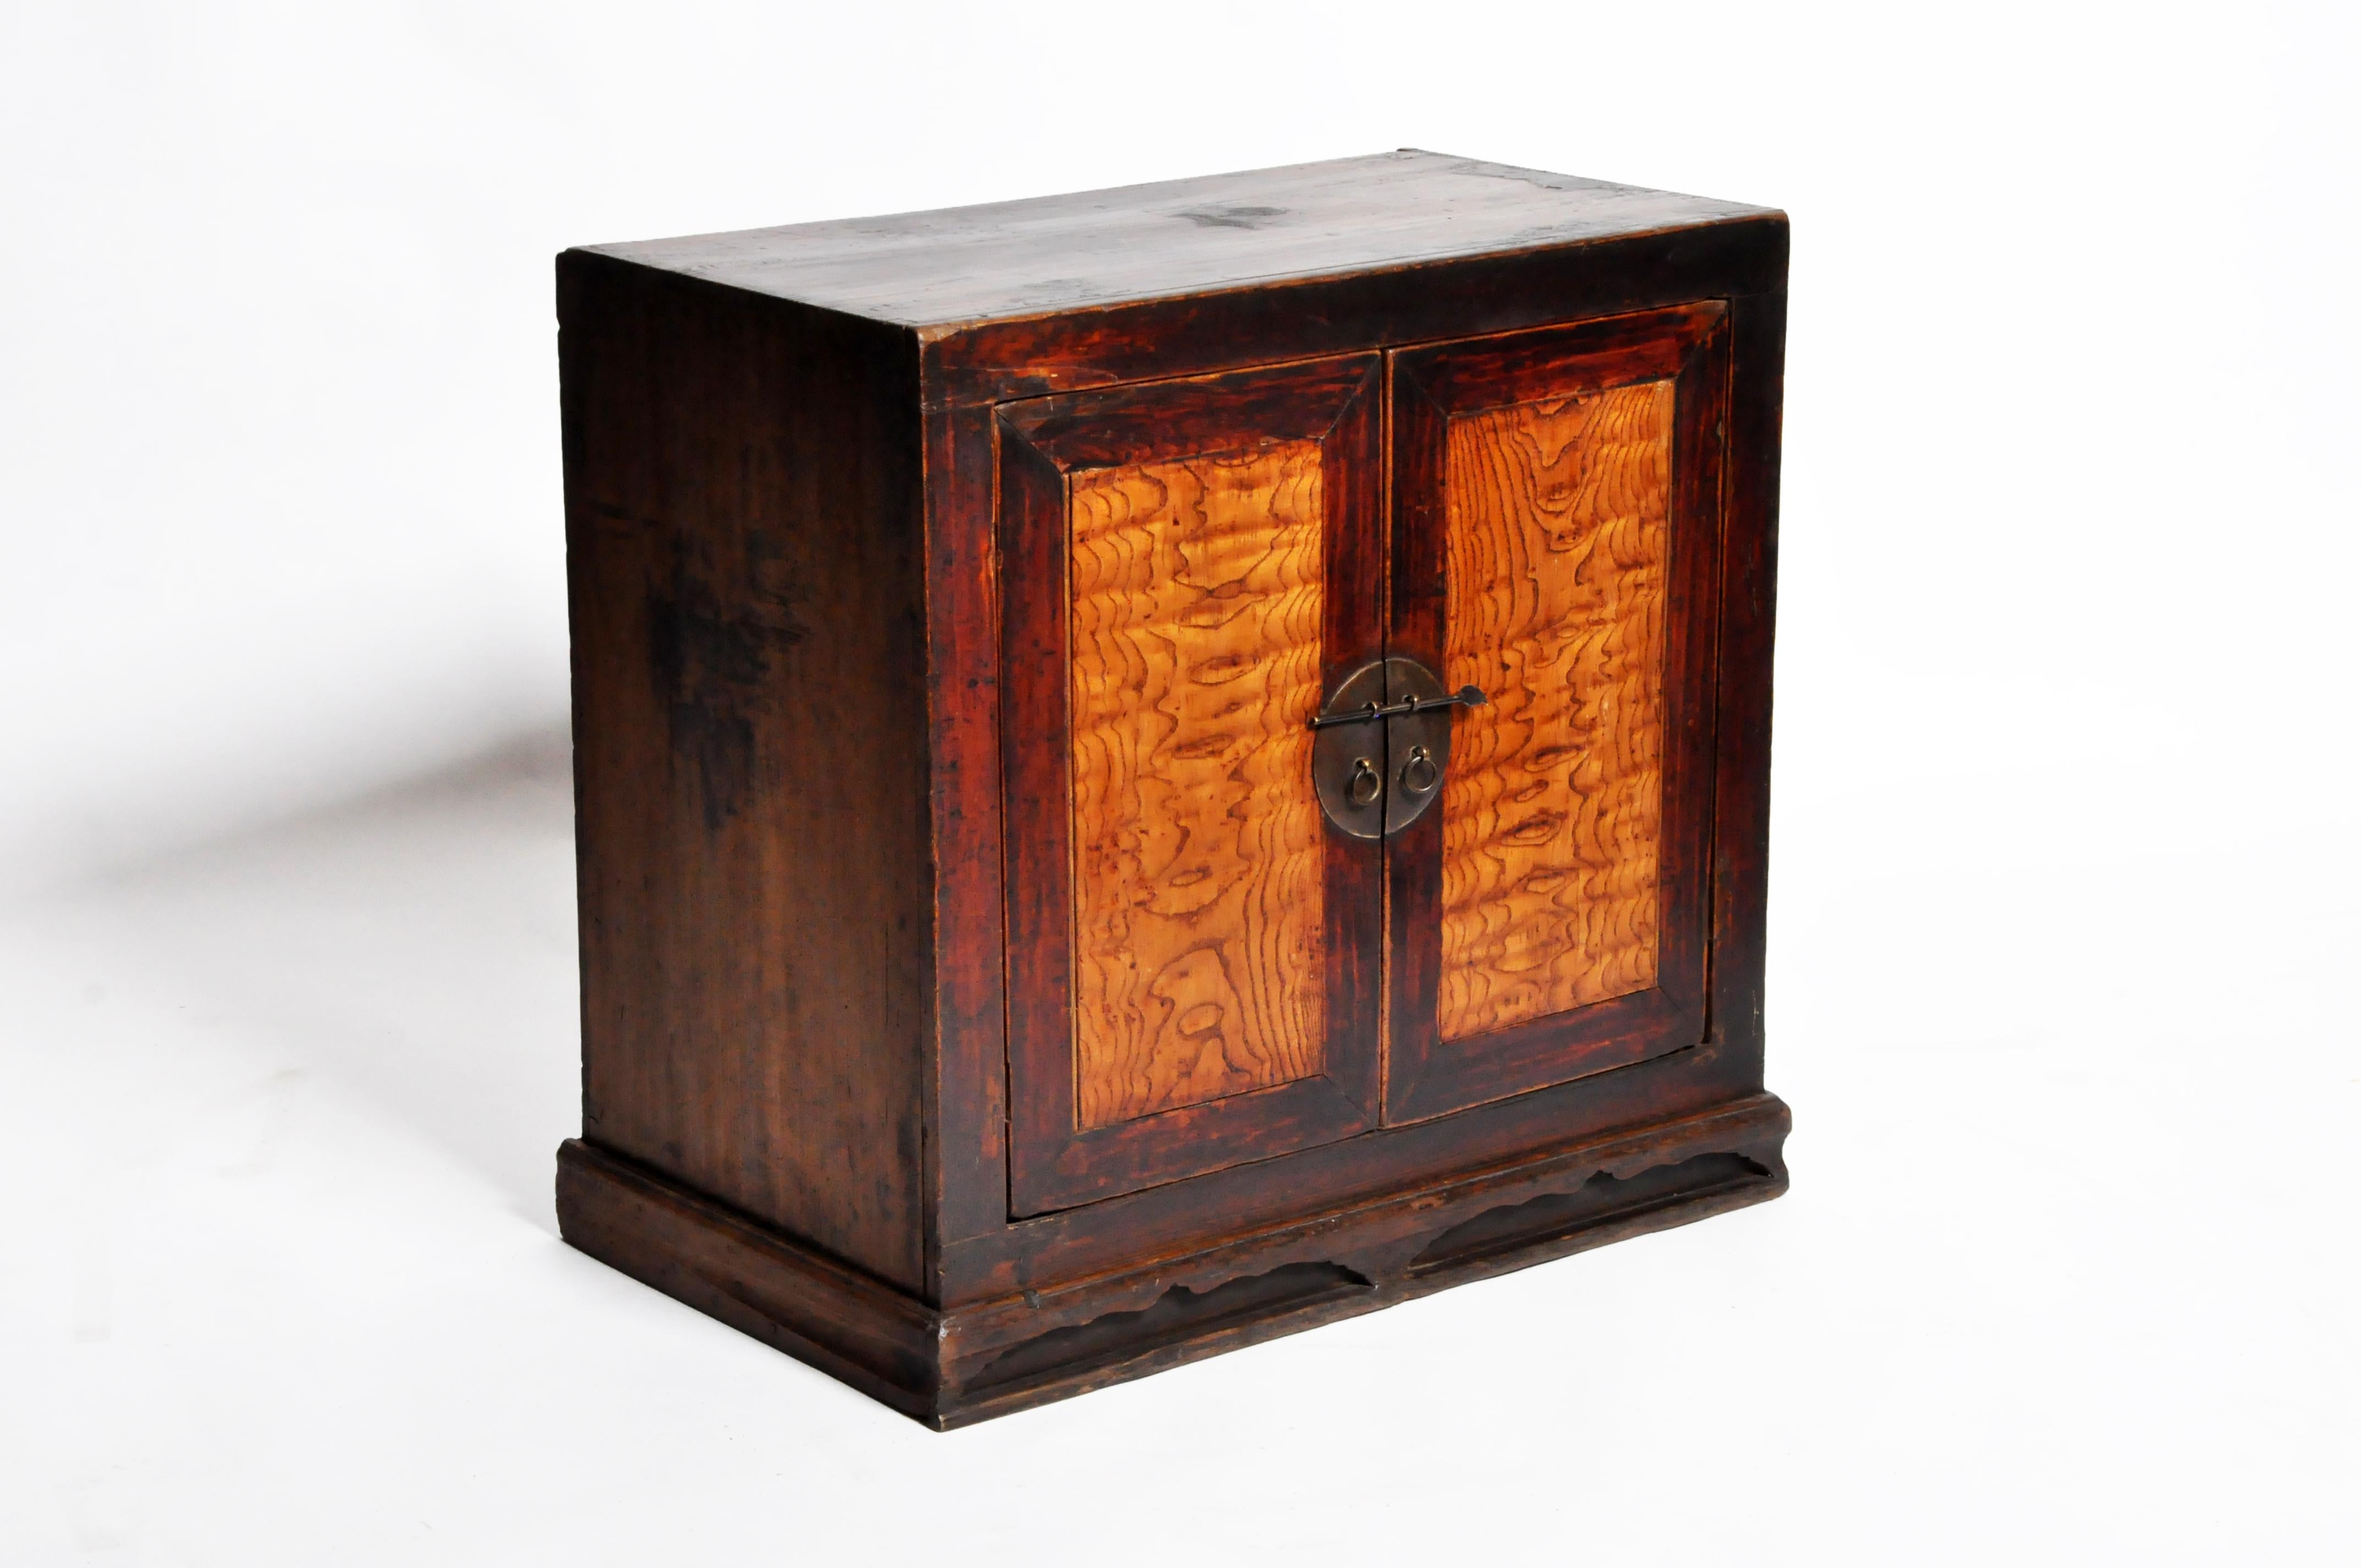 Late Qing Dynasty Chinese Oxblood Lacquer Cabinet 13